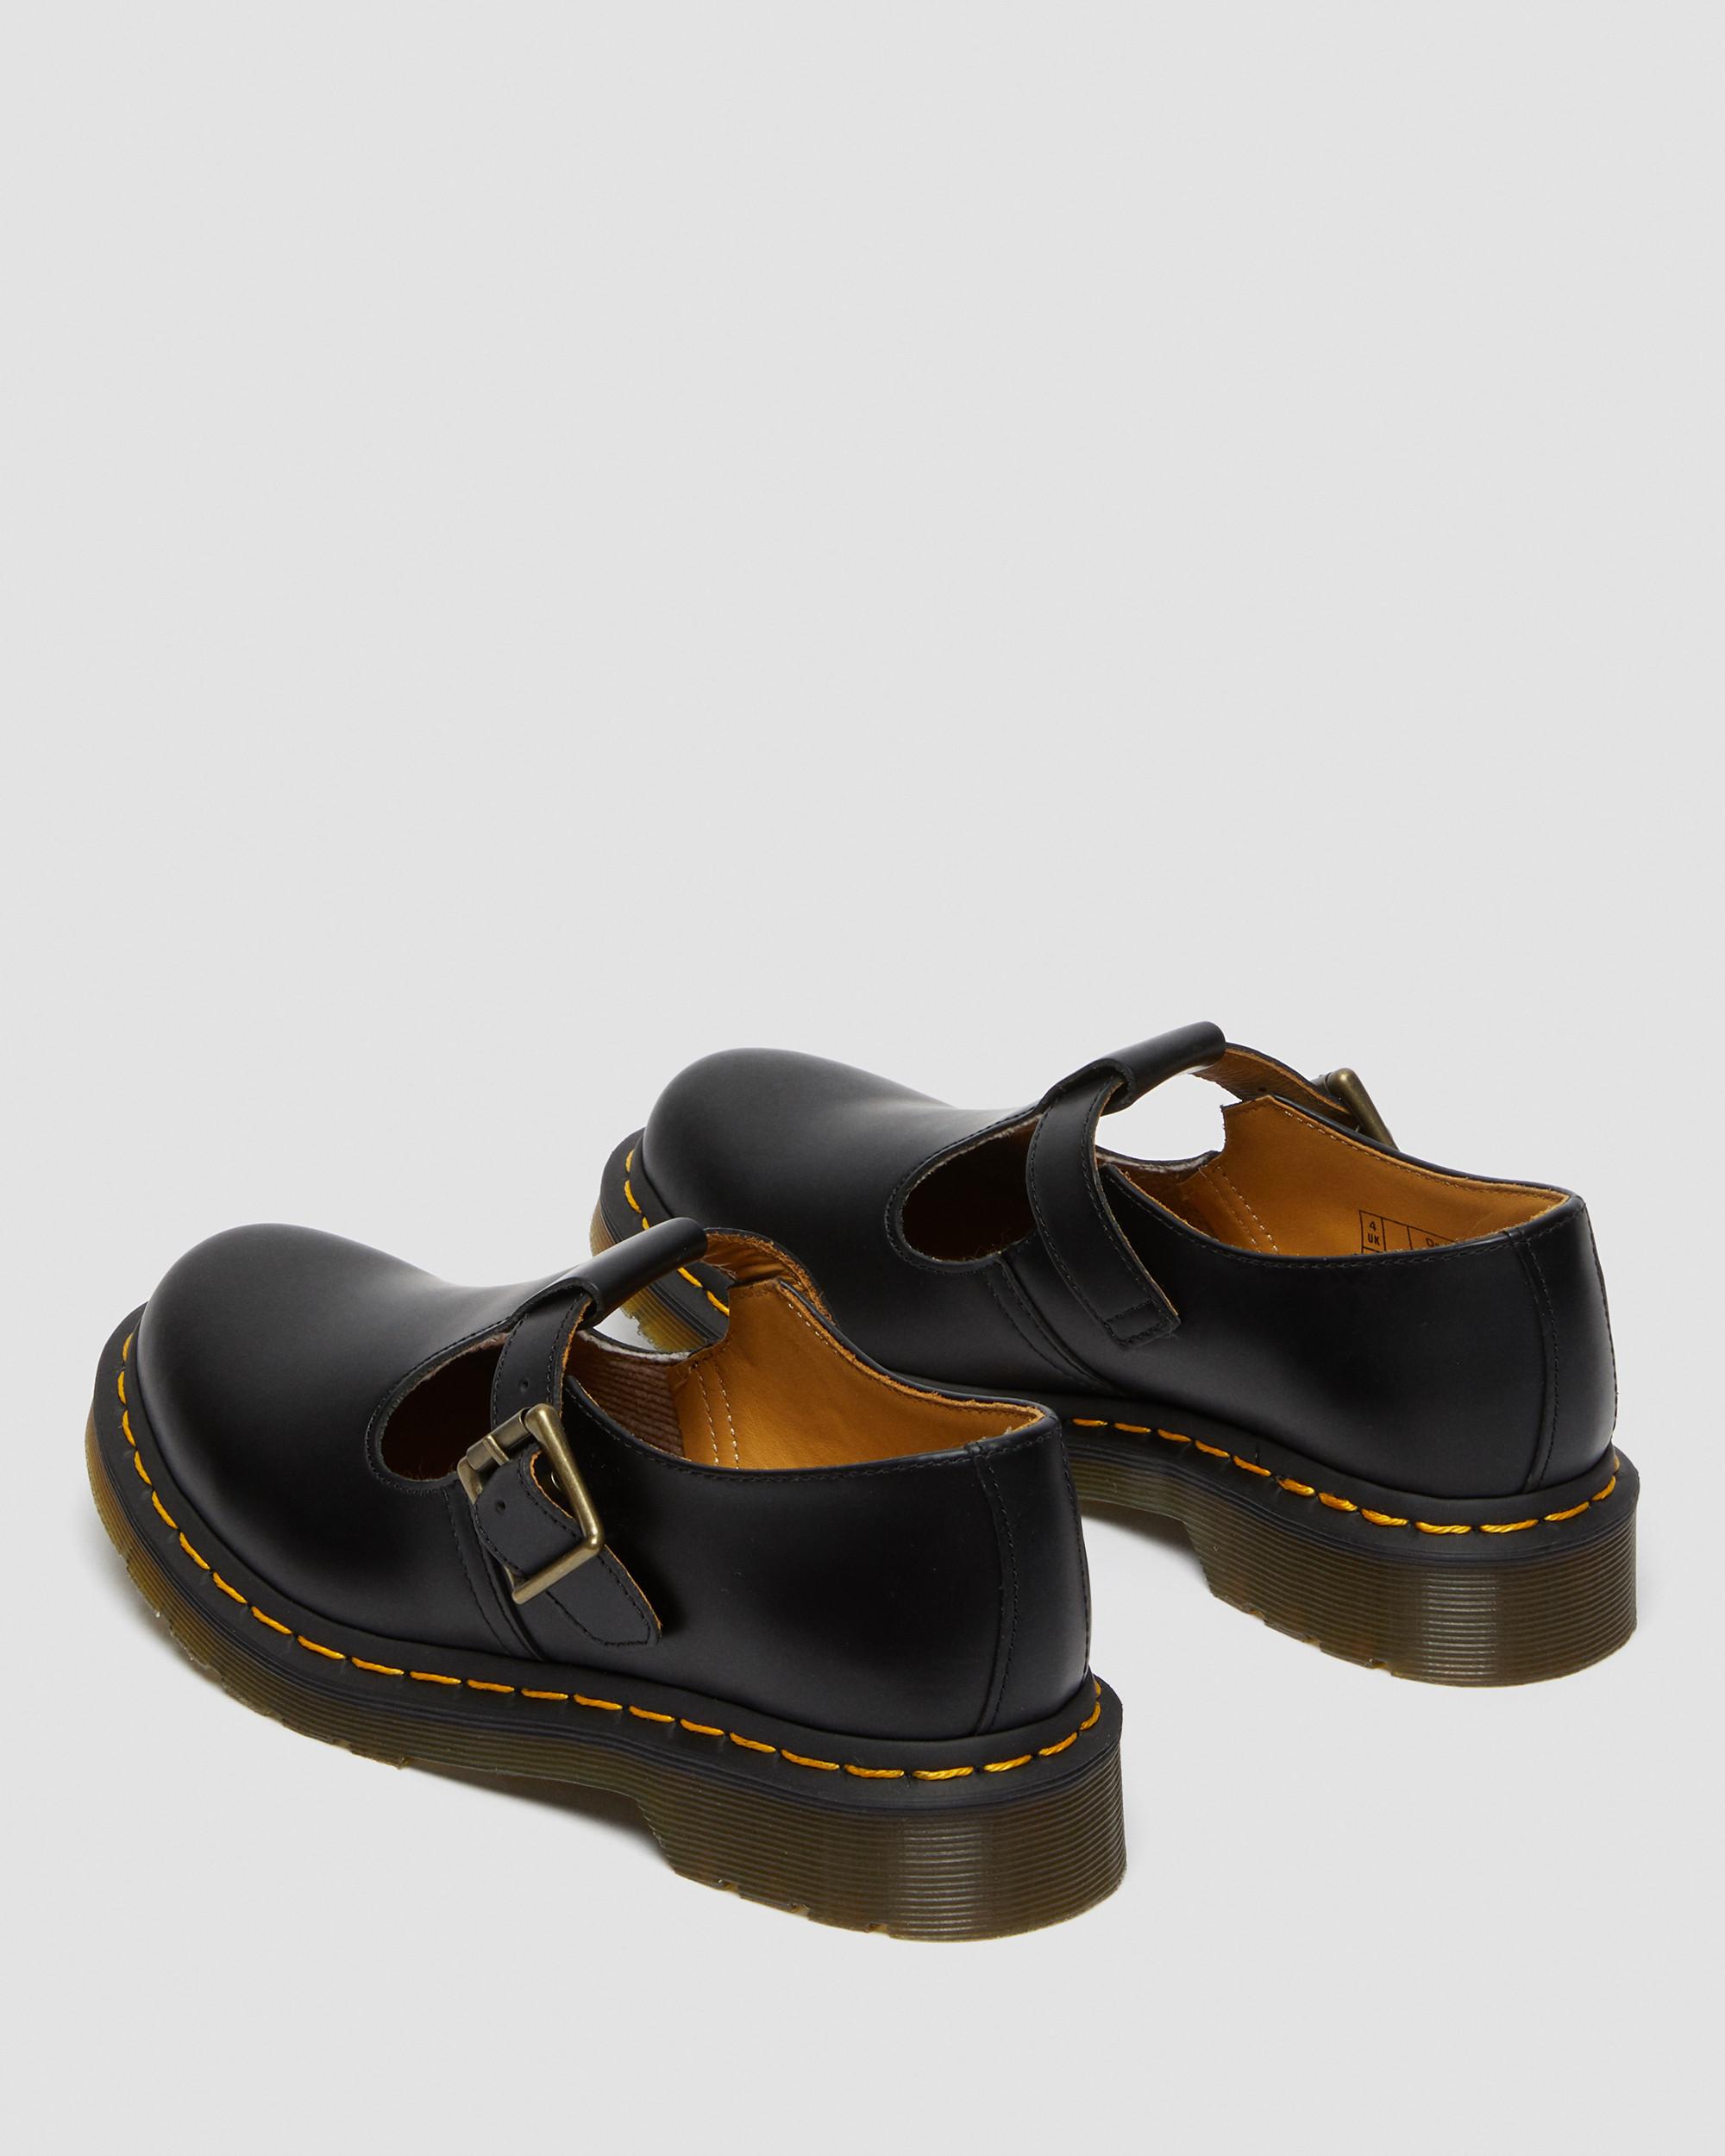 Scarpe Mary Jane Polley nere in pelle SmoothScarpe Mary Jane Polley in pelle Smooth Dr. Martens